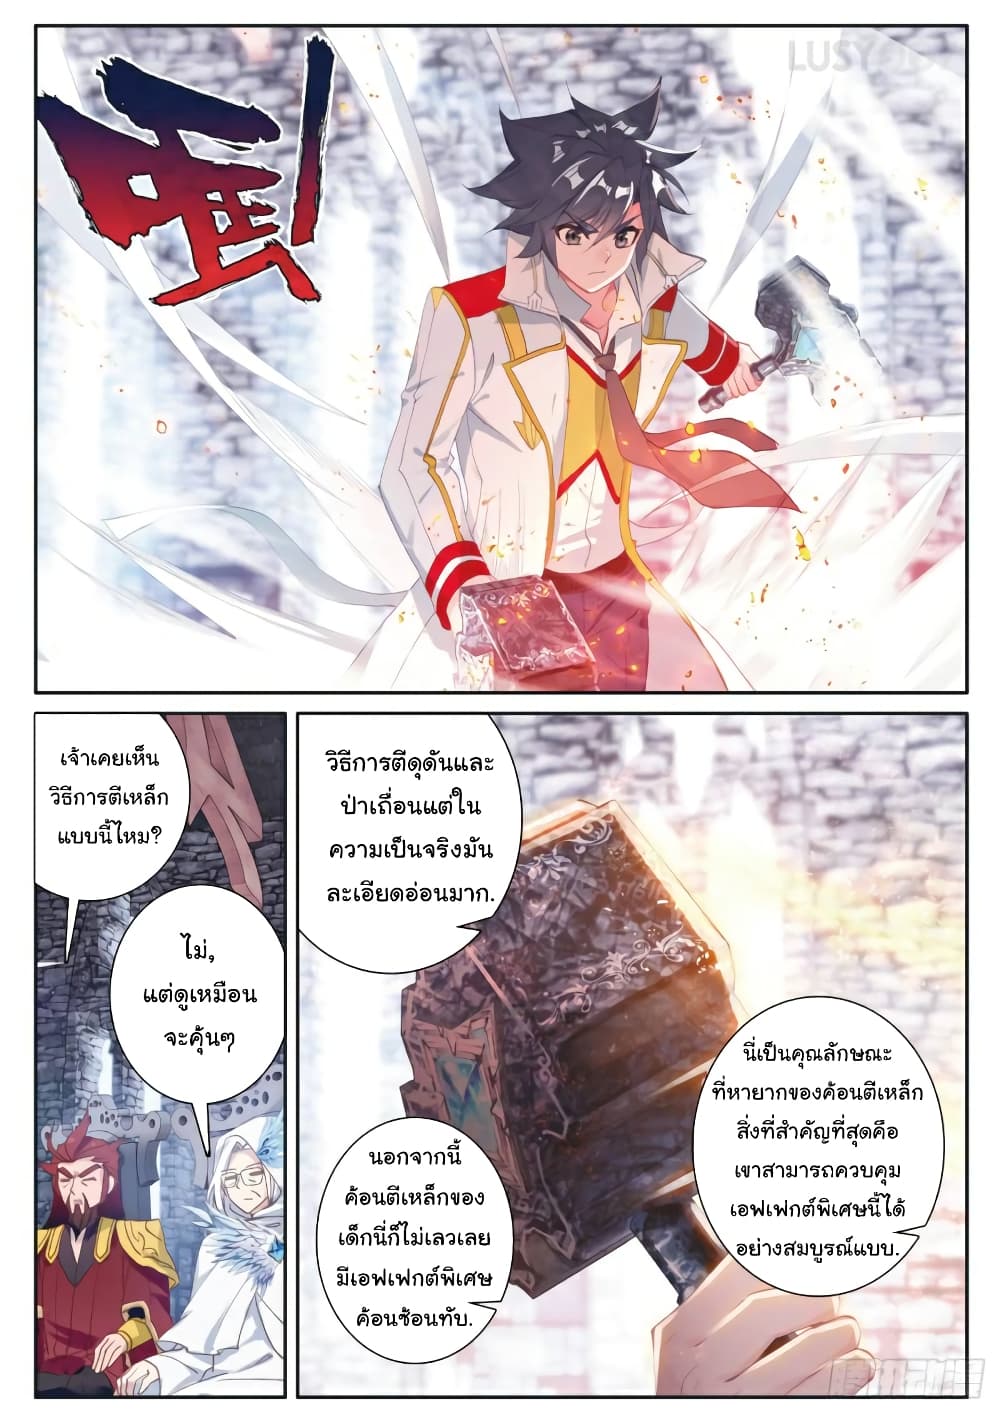 Douluo Dalu 3: The Legend of the Dragon King 165-หลอมจิต